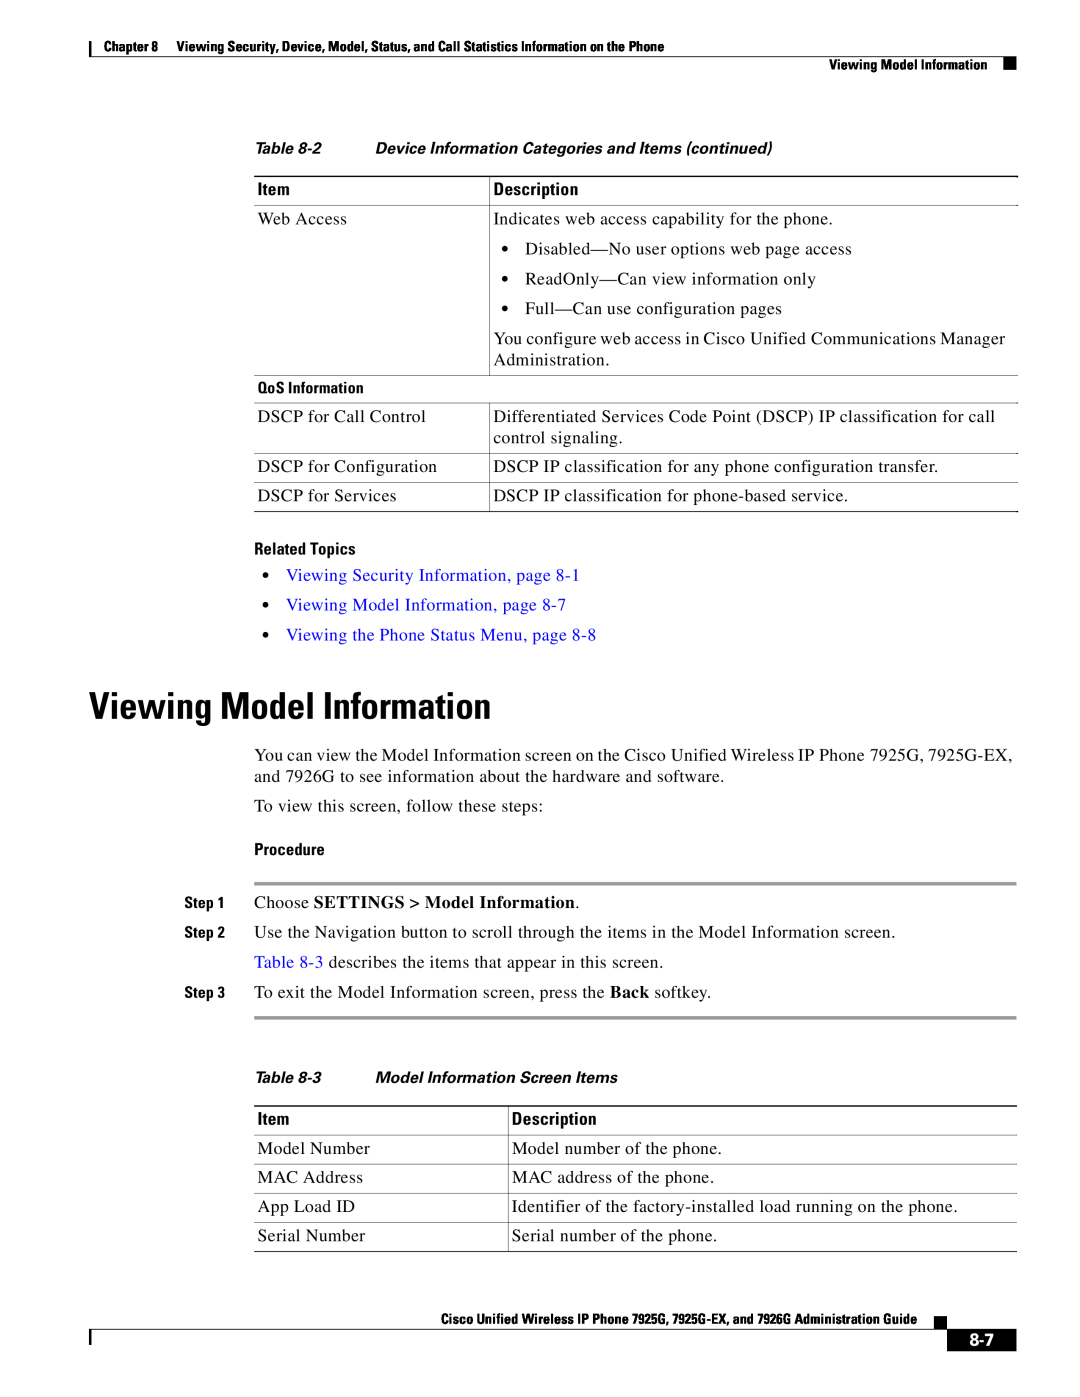 Cisco Systems 7926G Viewing Security Information, page Viewing Model Information, page, Description, Related Topics 